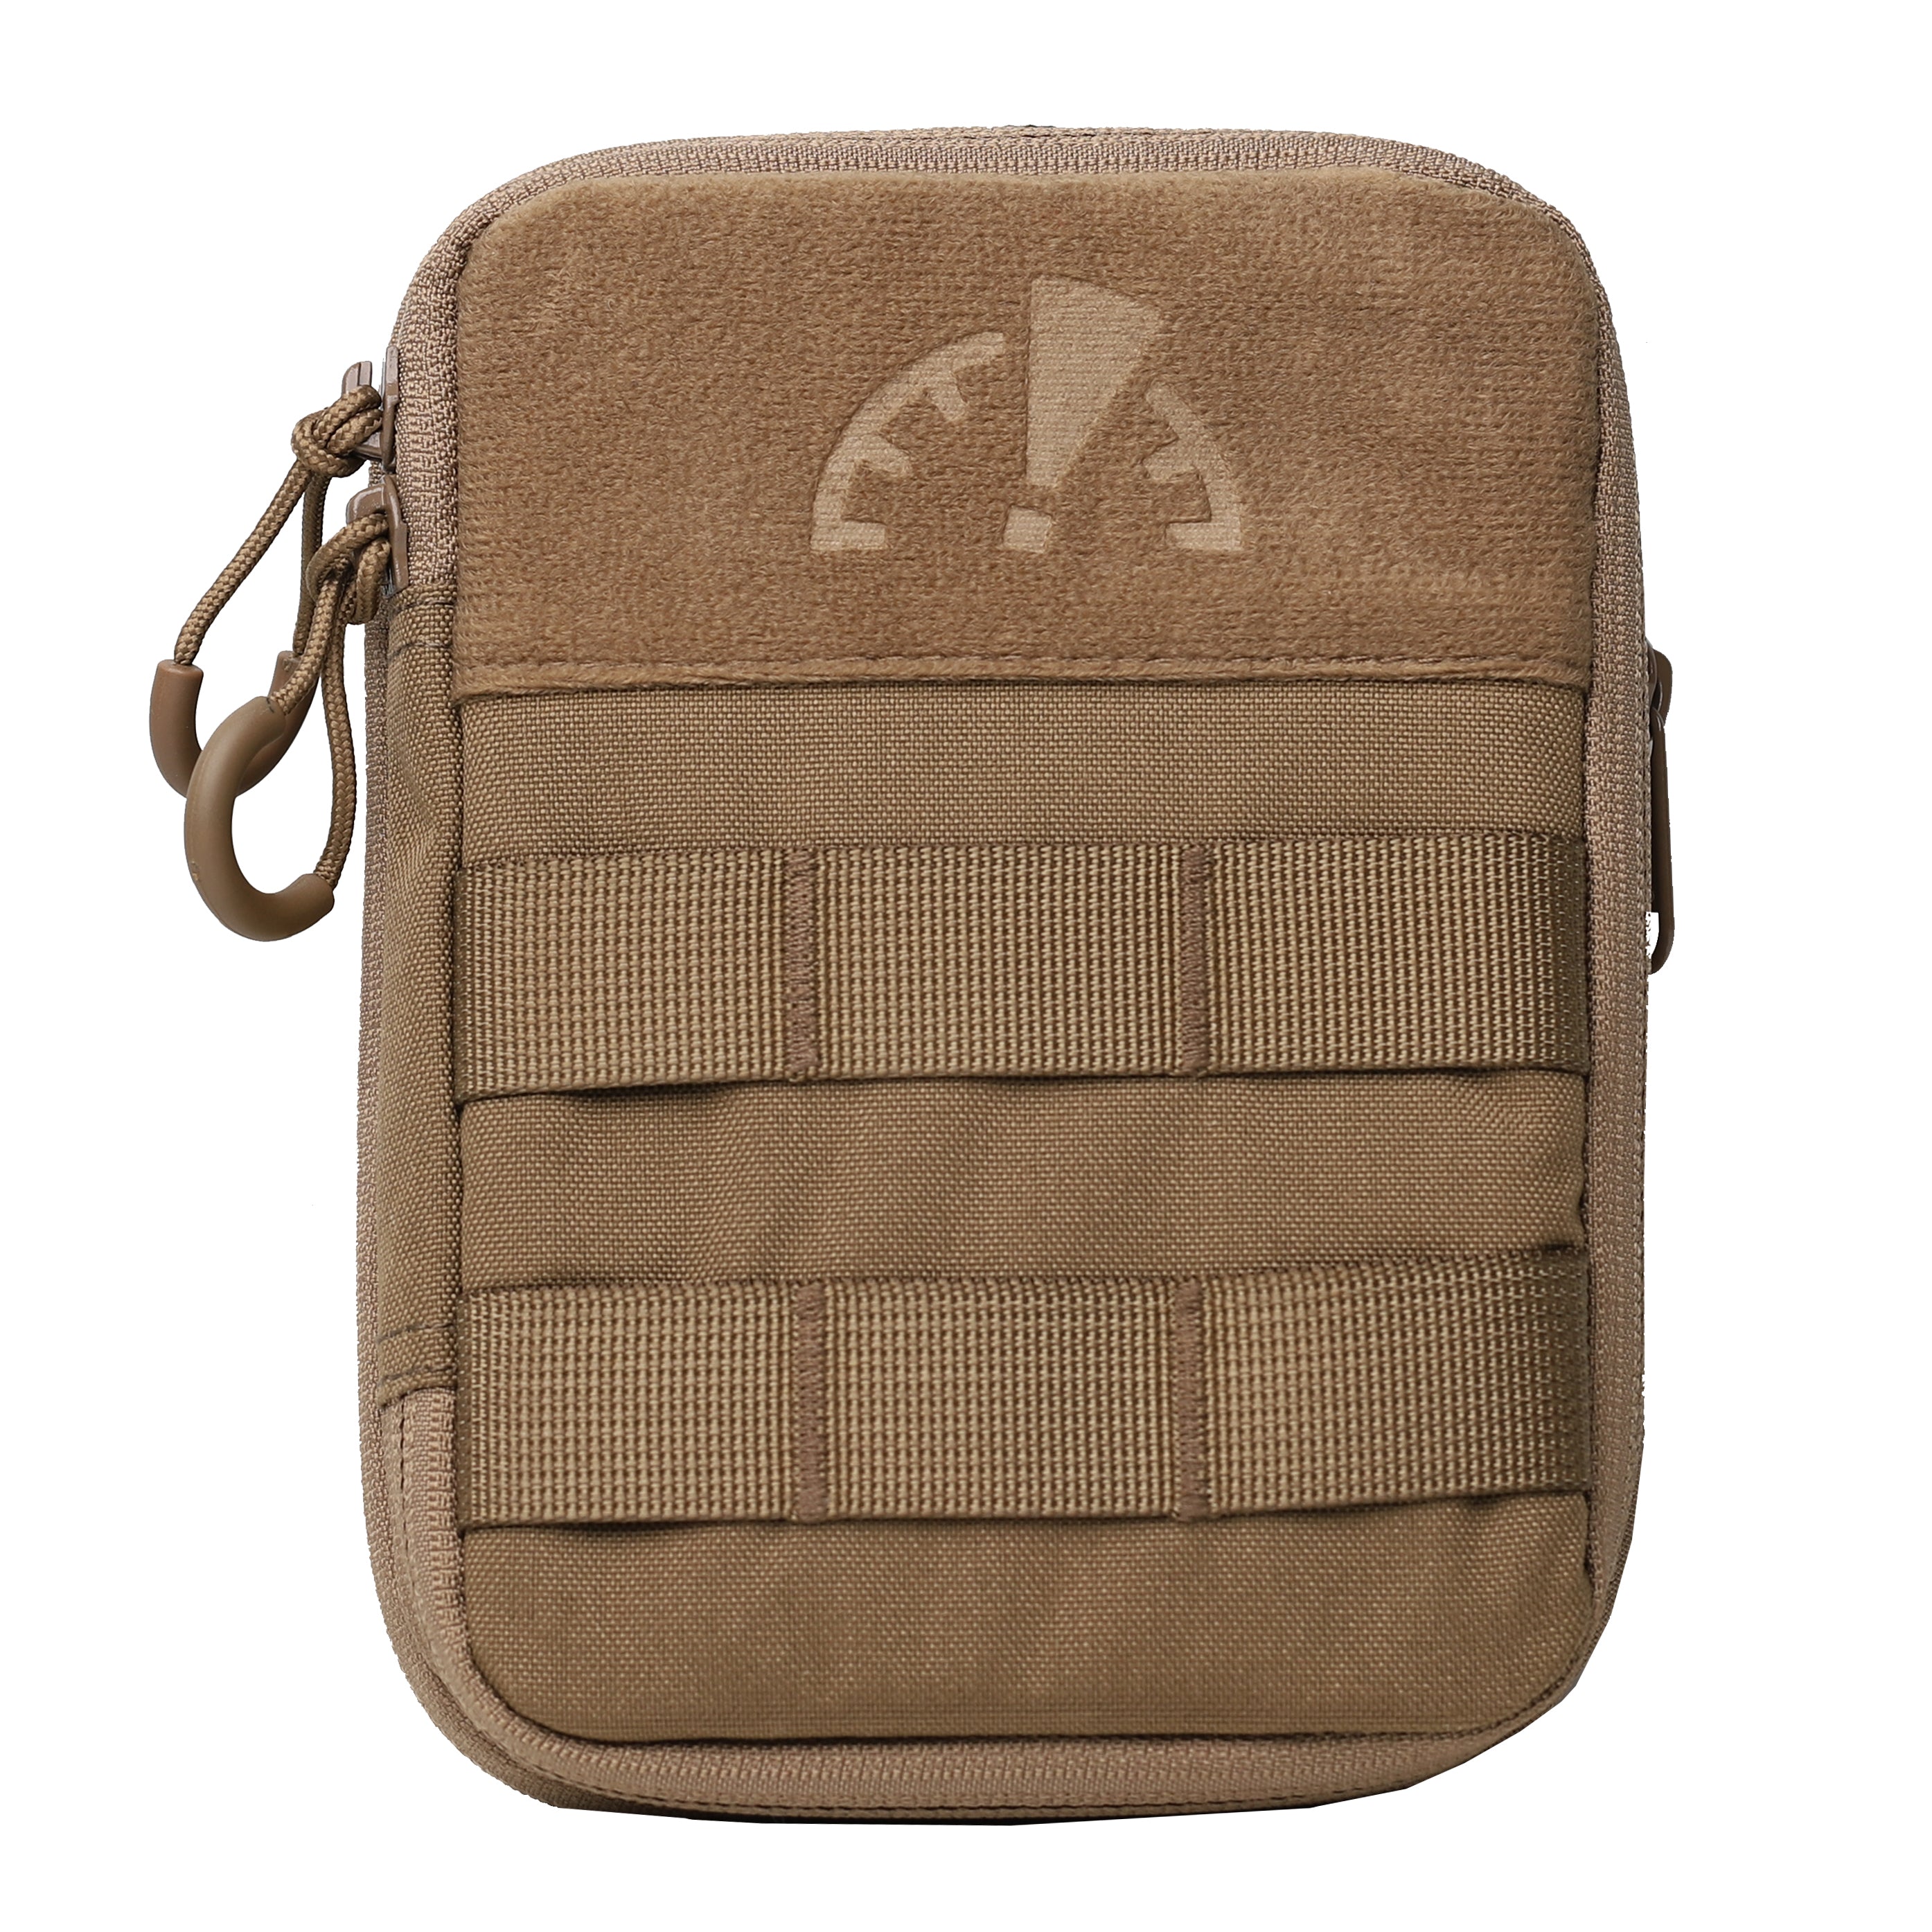 What Are Your Favorite Features in an EDC Pouch?